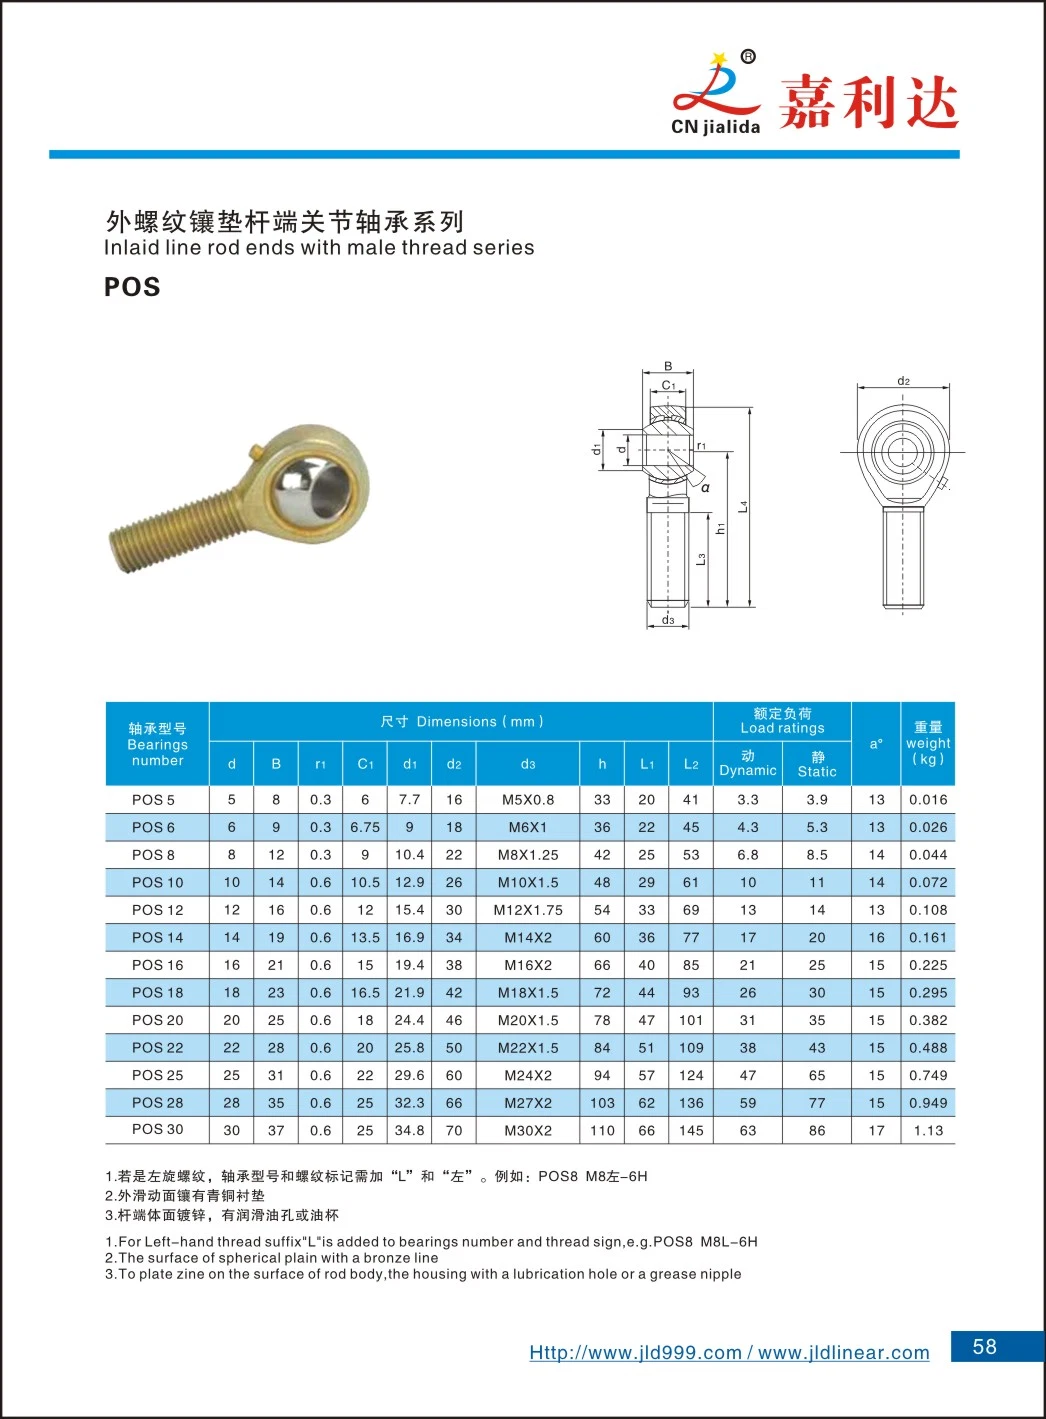 China Factory Heim Rose Ball Joint Bearing/ Spherical Plain Rod End Bearing Right/Left Thread (PHS/POS/SITK/SATK/NHS/NOS) for Machine/3D Printer/Auto Parts